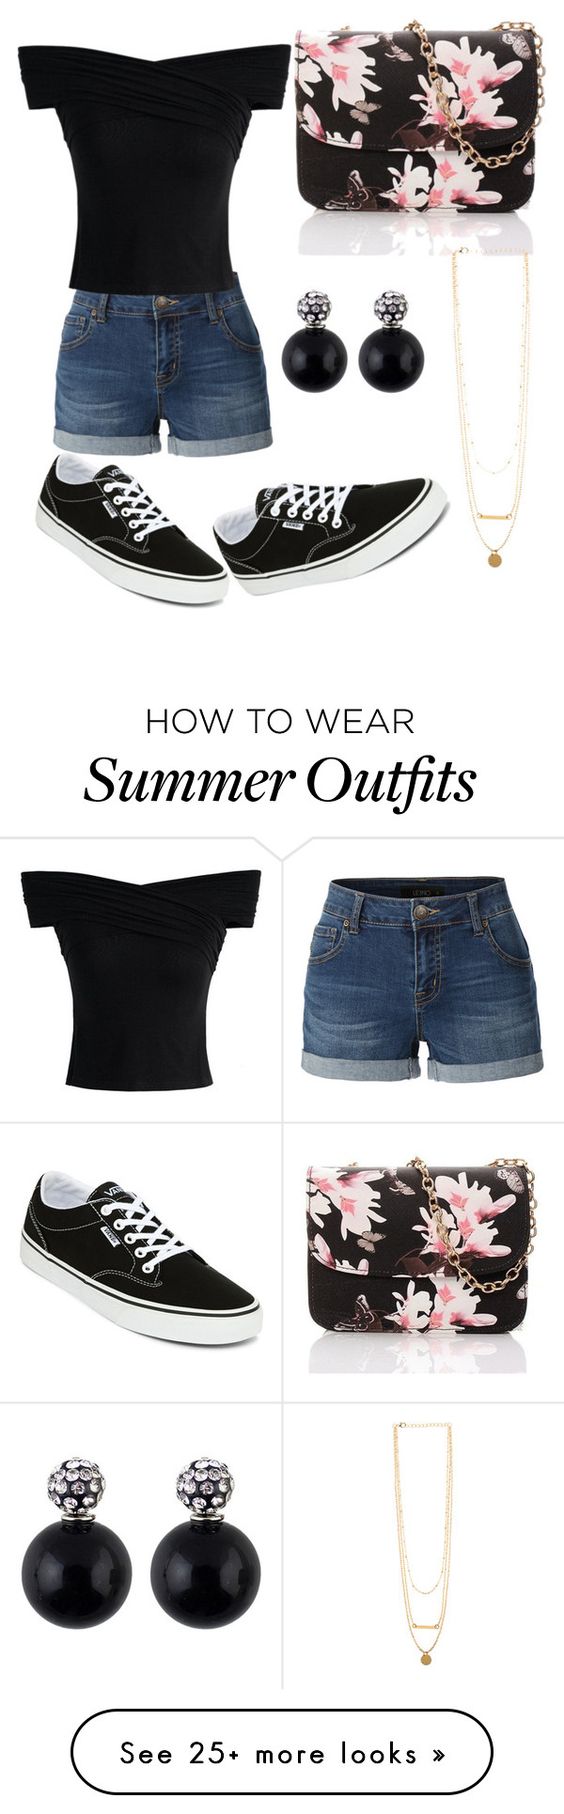 10 Amazing Outfits Ideas with Shorts